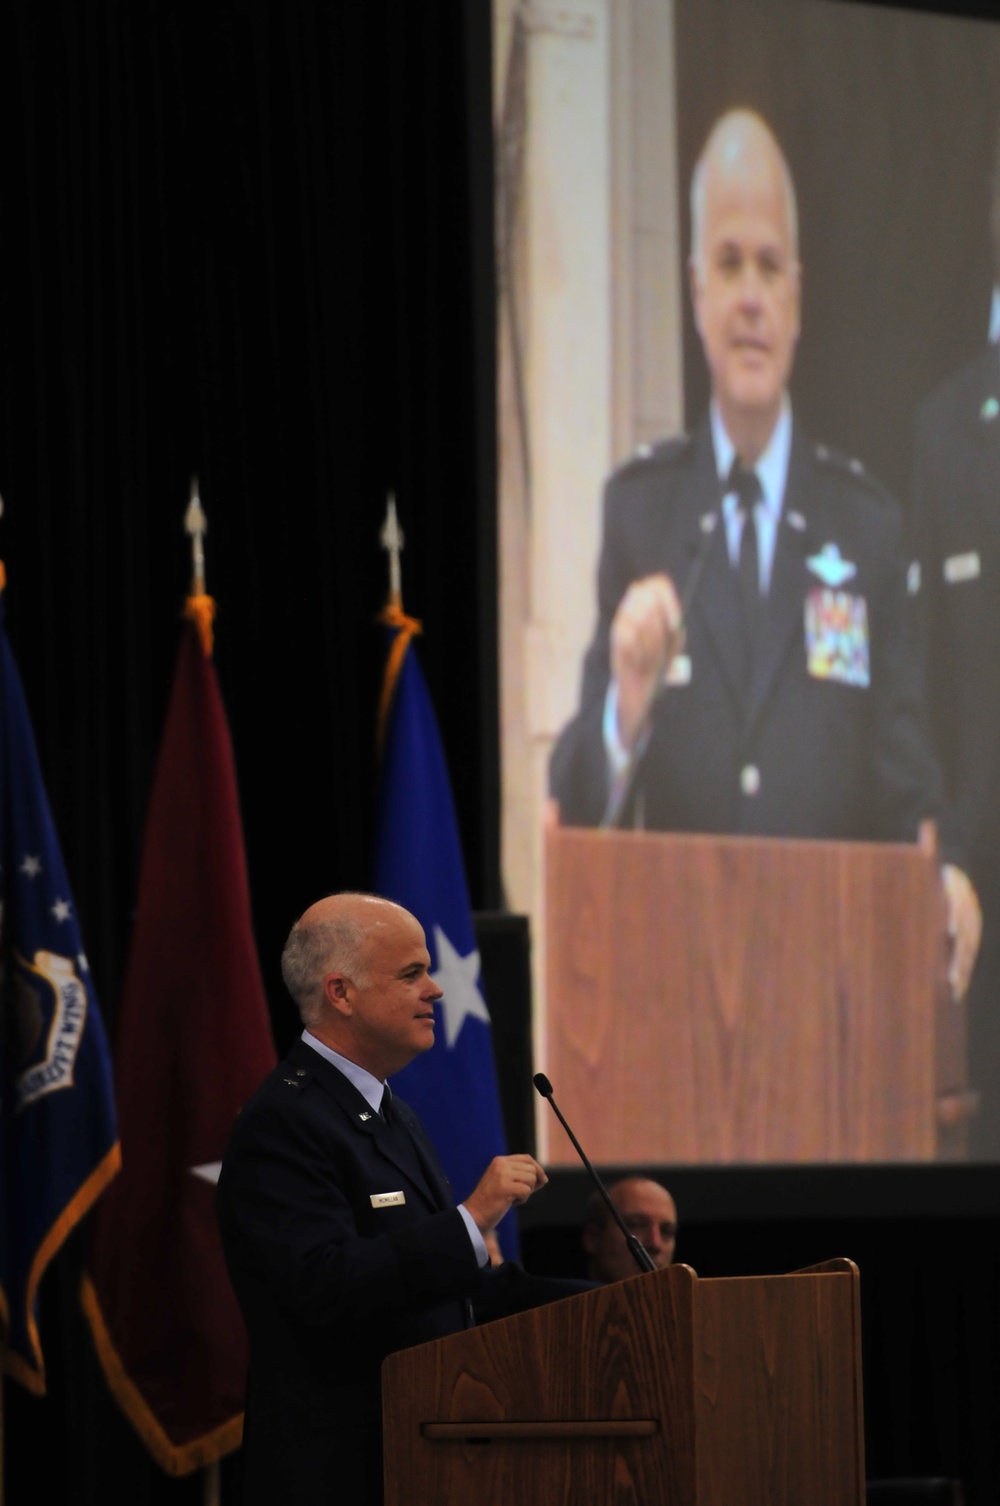 145th Airlift Wing Commander gets first star